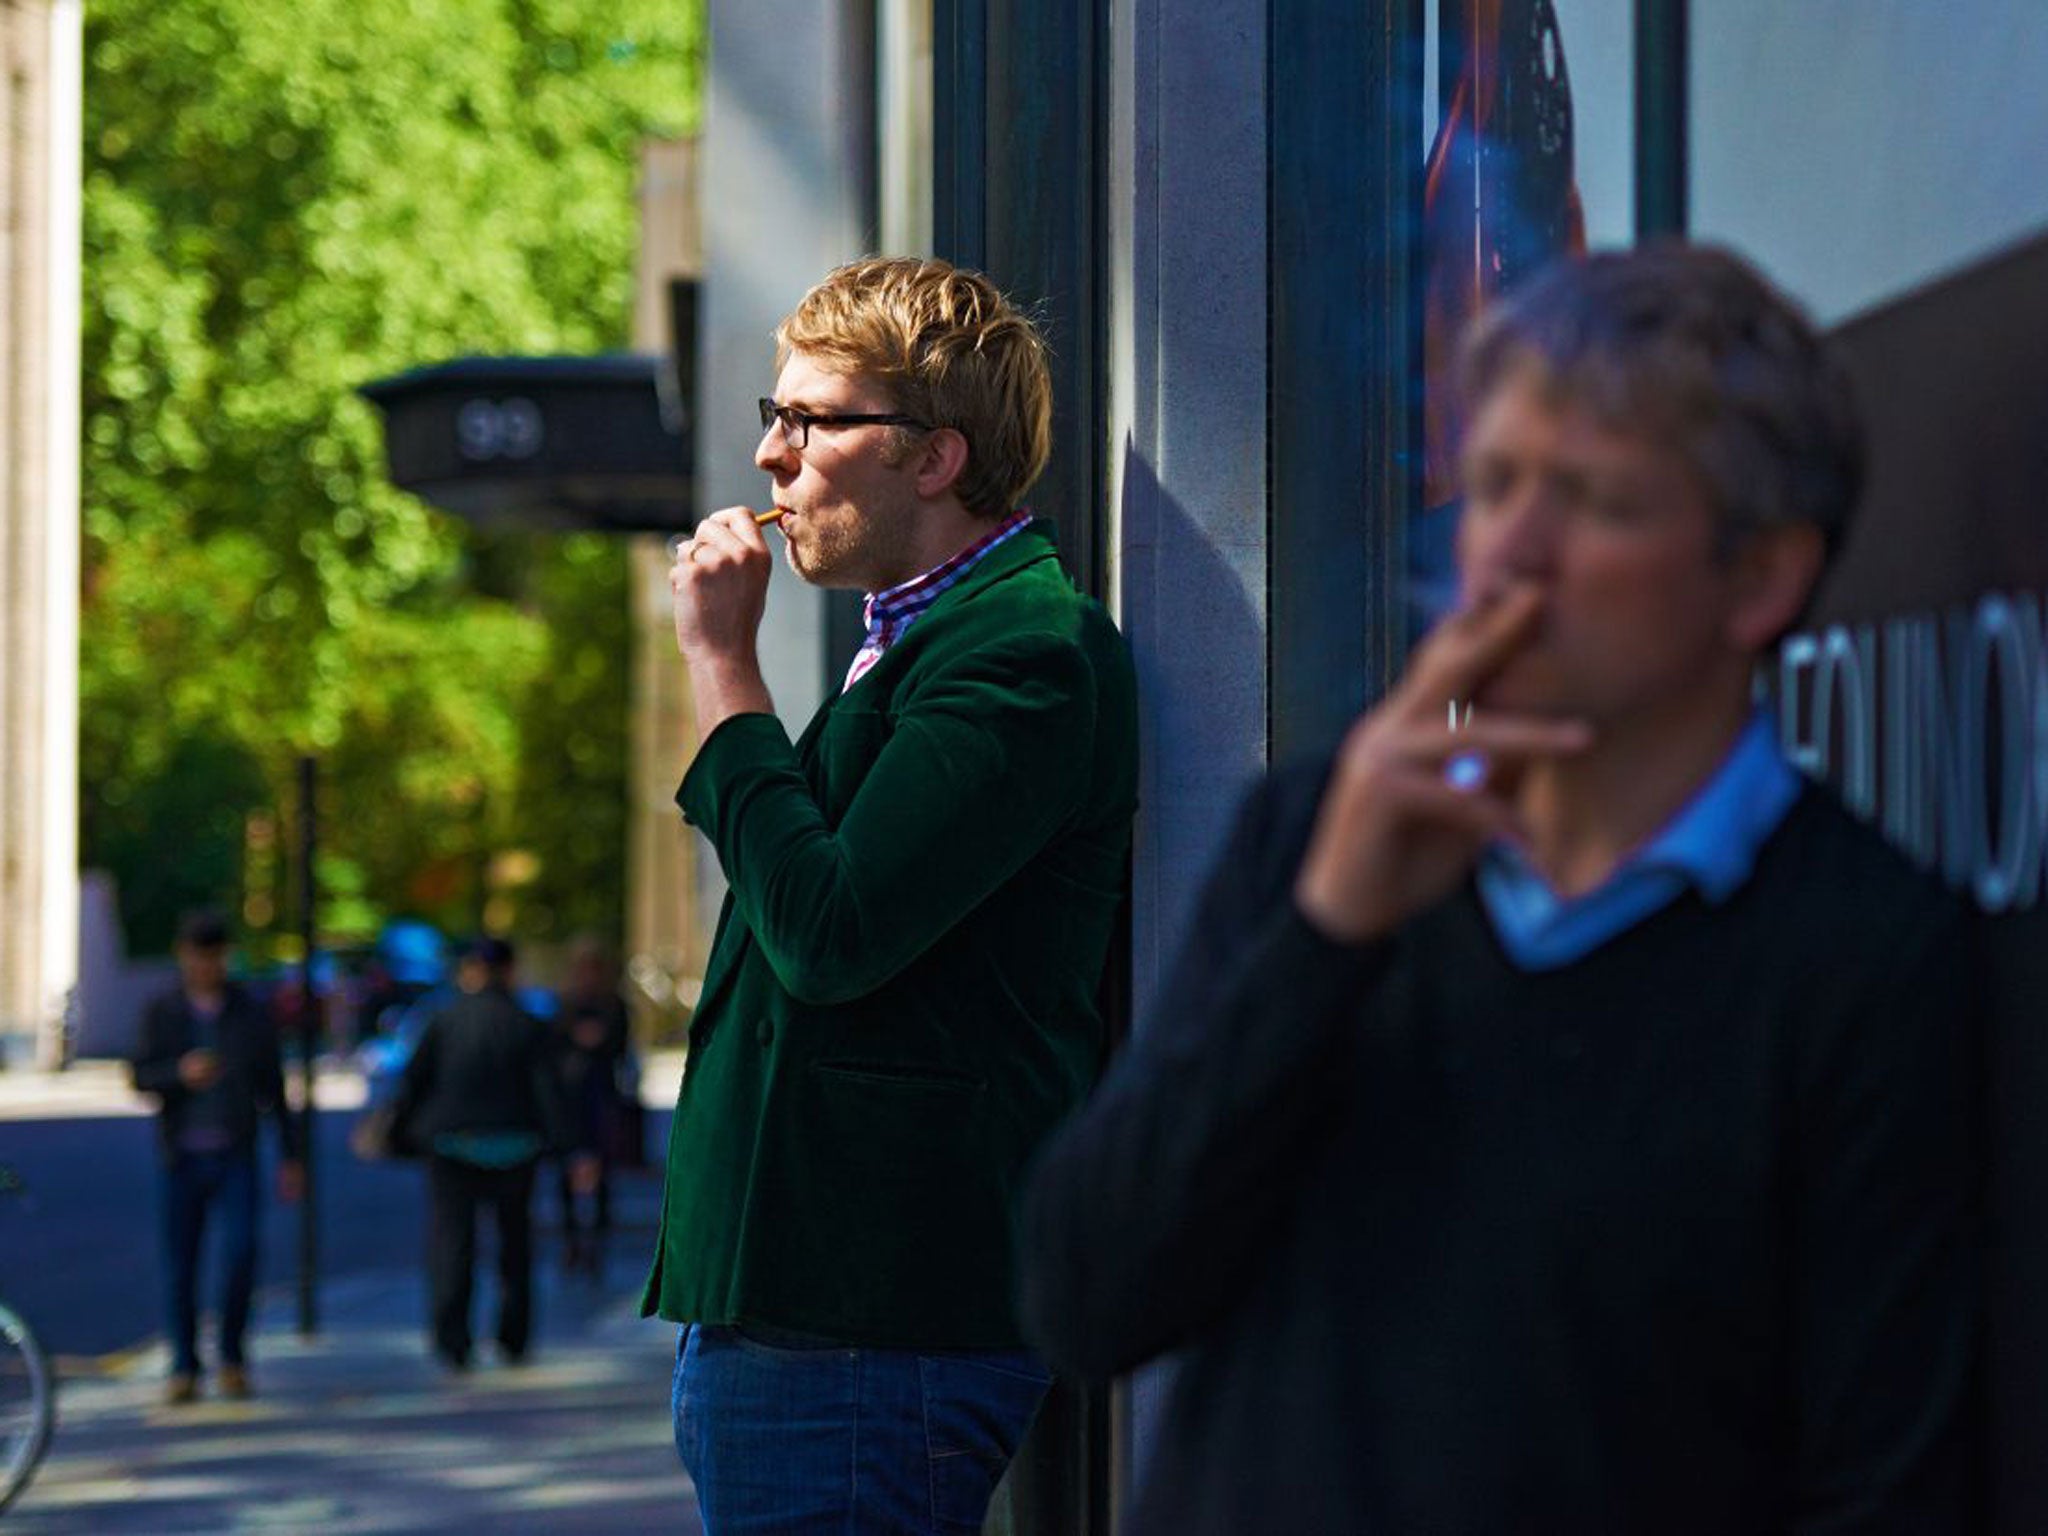 Samuel Masters smoking an e-cigarette outside an office building